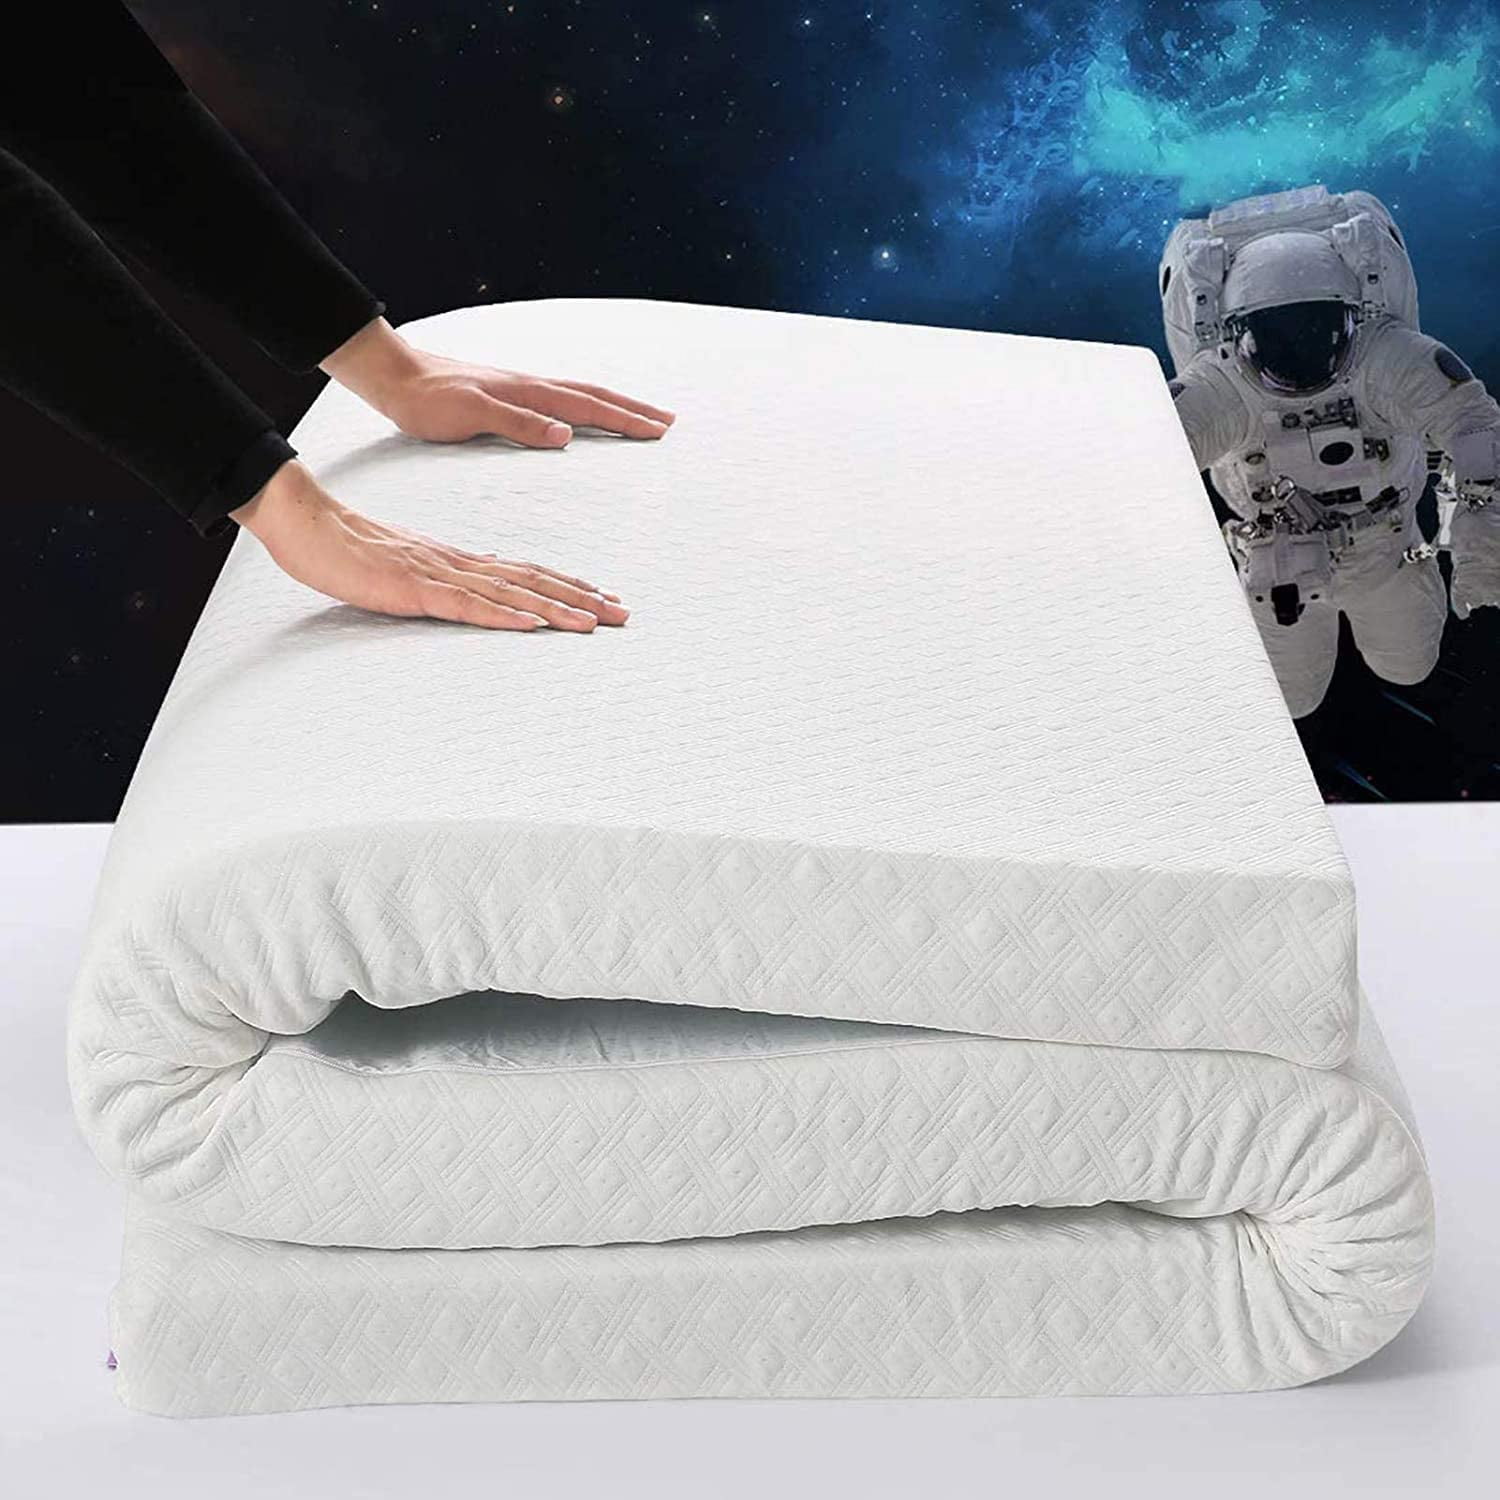 NEW LUXURY SOFT CHEERFUL BAMBOO 1 INCH MEMORY FOAM MATTRESS TOPPER PROTECTOR 